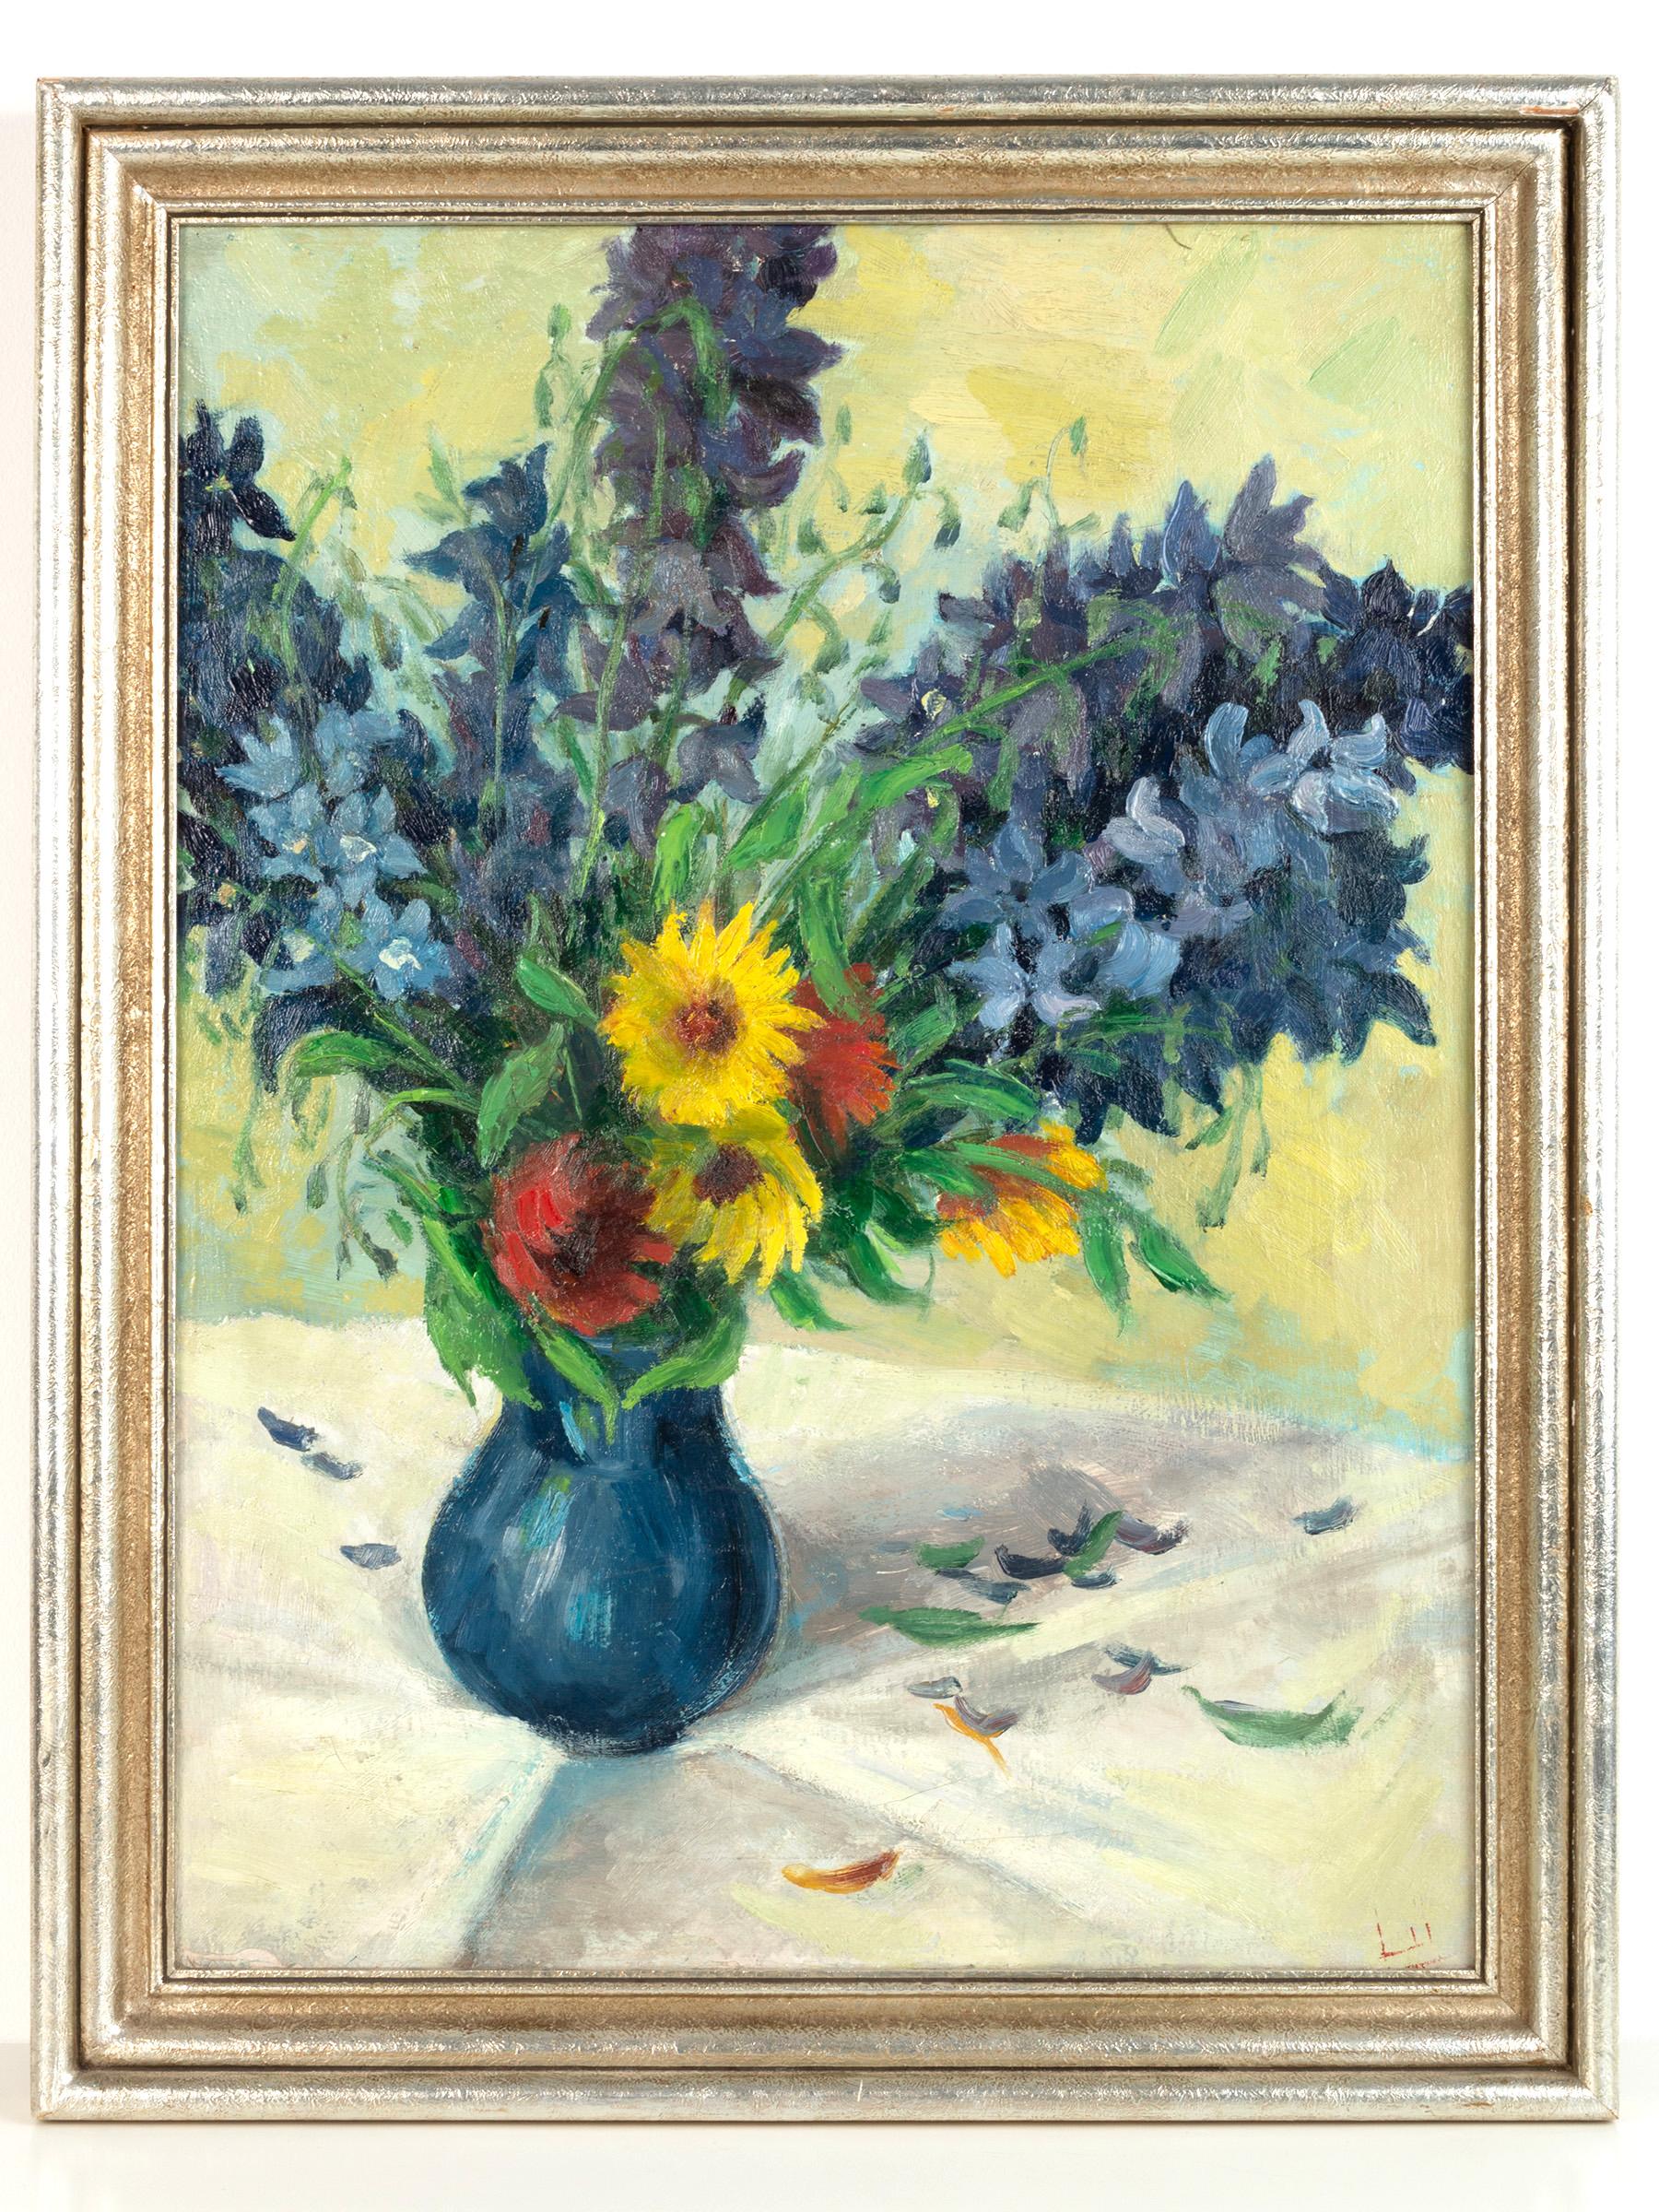 A mid-century oil on board still life hyacinths in a blue vase C.1950.

Set within a frame.
Good, vibrant colour.
Signed unclearly in bottom right corner.
Provenance: Private London Collection.

Very good condition commensurate of age.
 